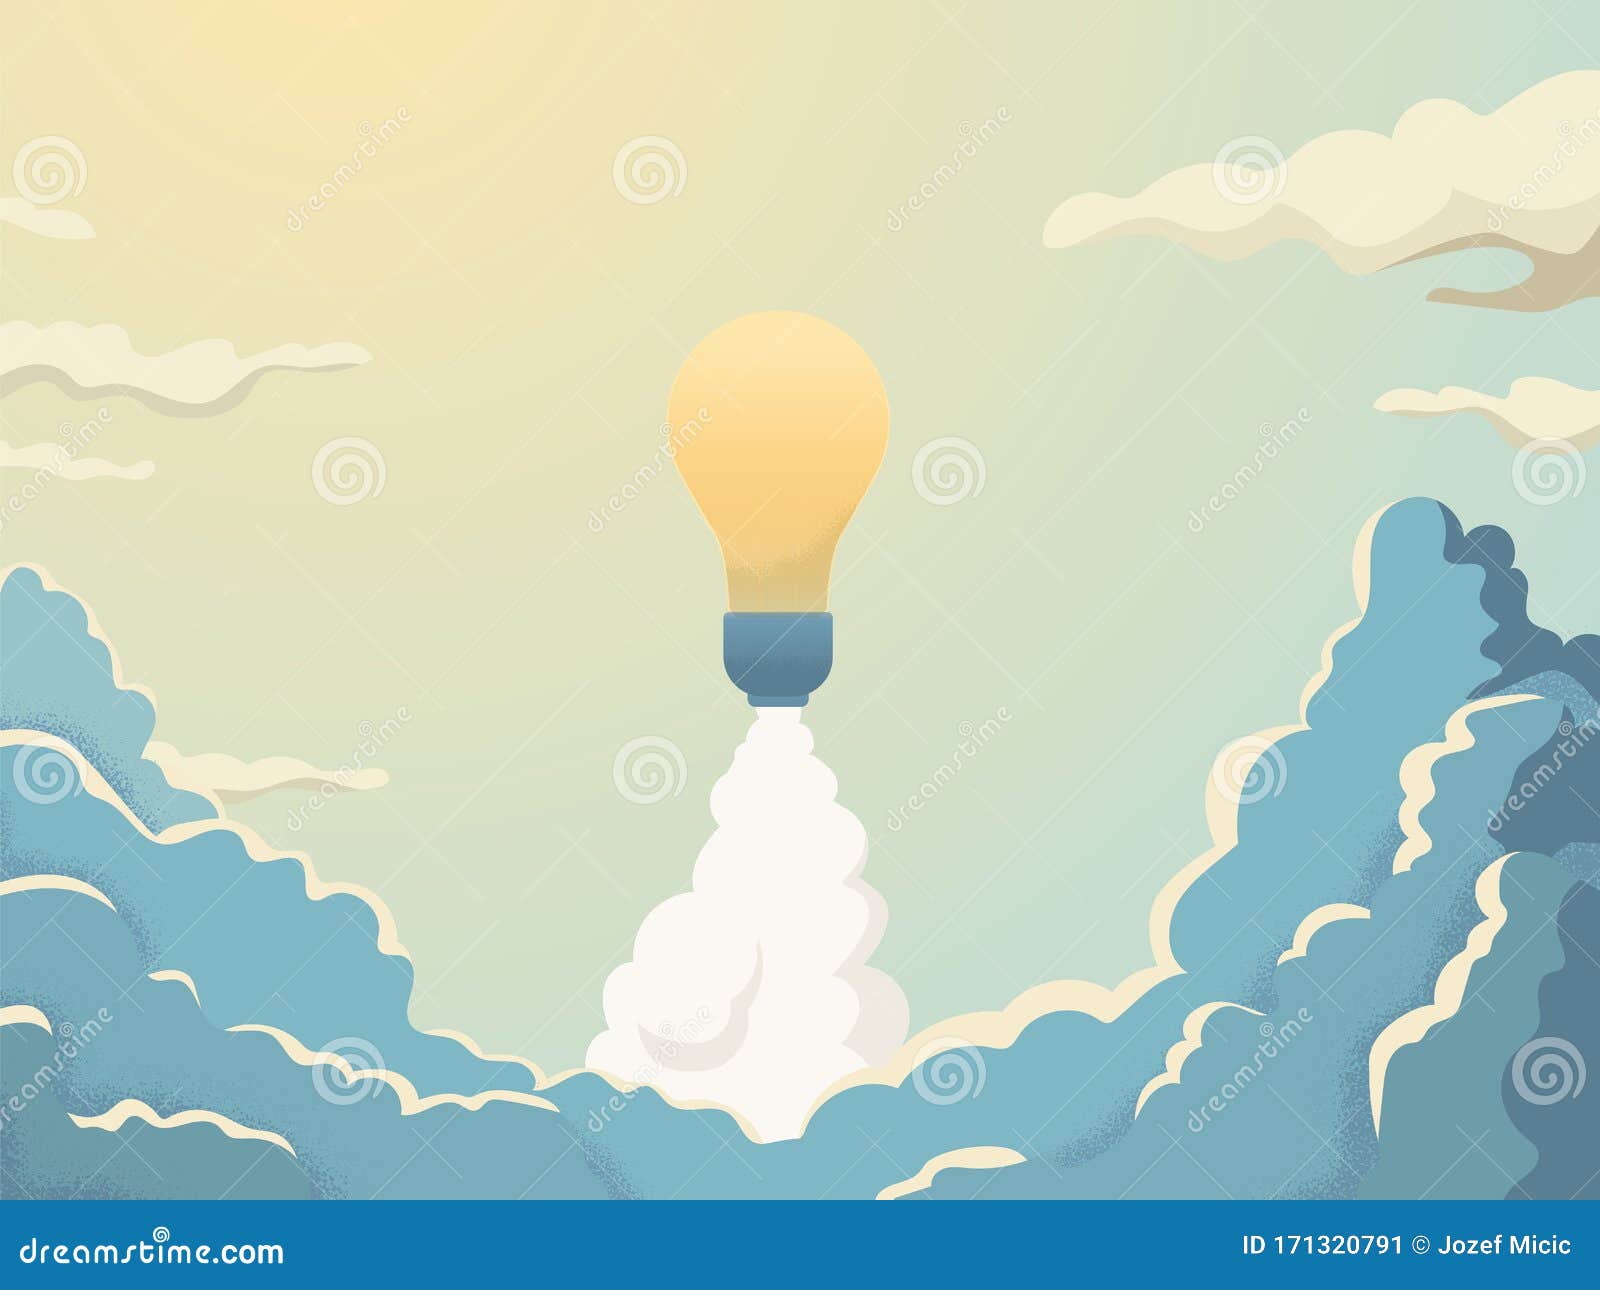 creativity  concept with lightbulb space rocket launch into space.  of innovation, invention, new business.